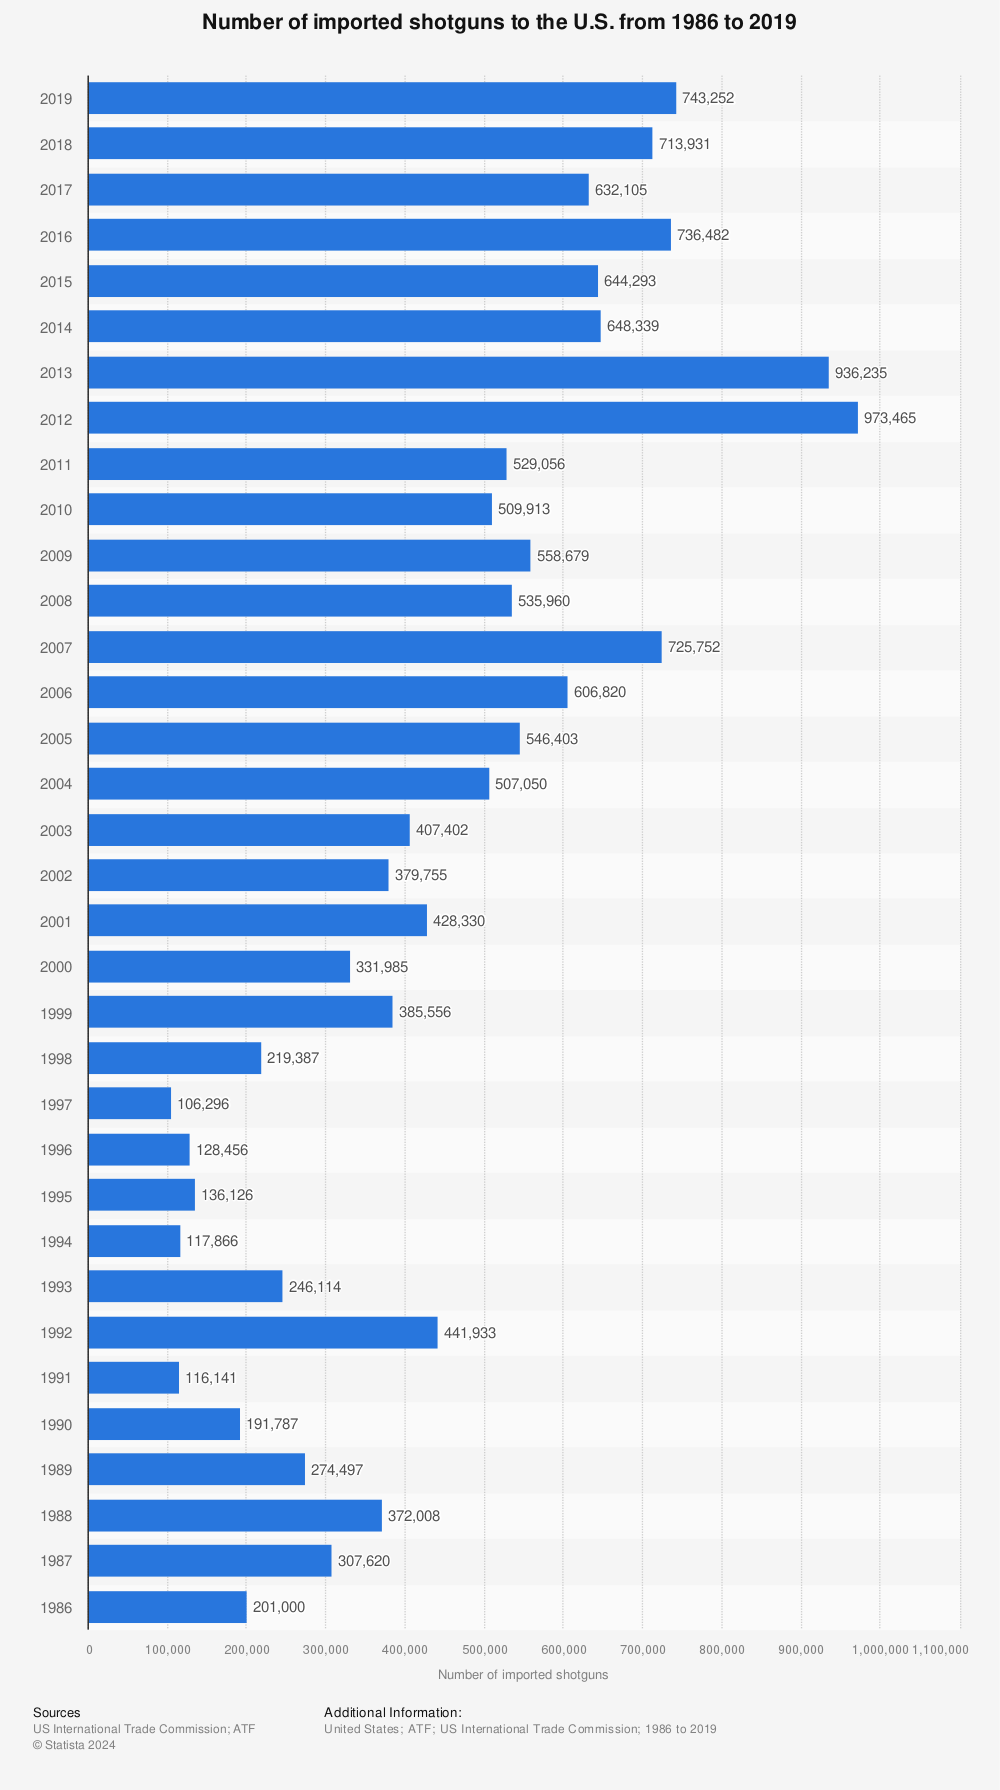 Statistic: Number of imported shotguns to the U.S. from 1986 to 2019 | Statista